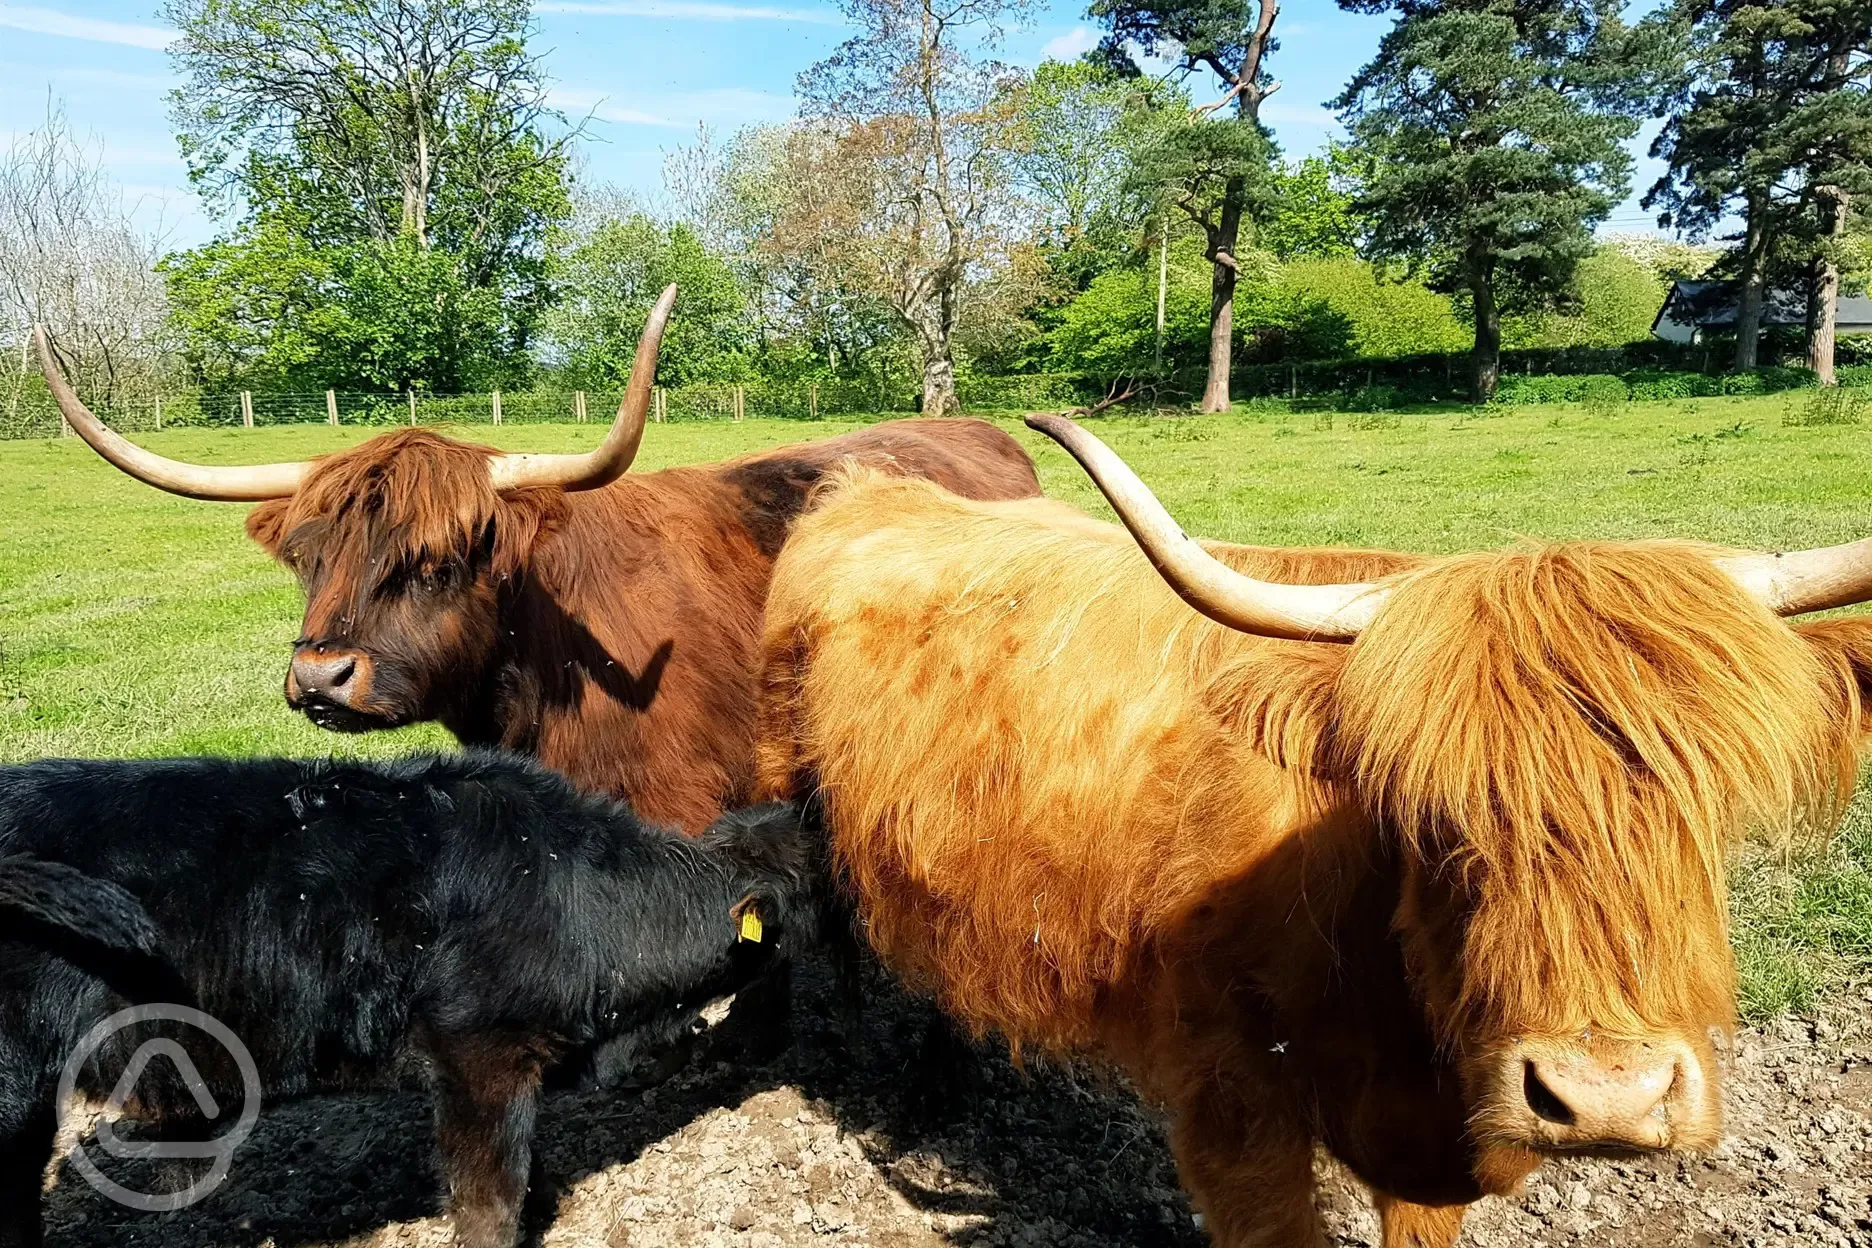 Local Highland cattle